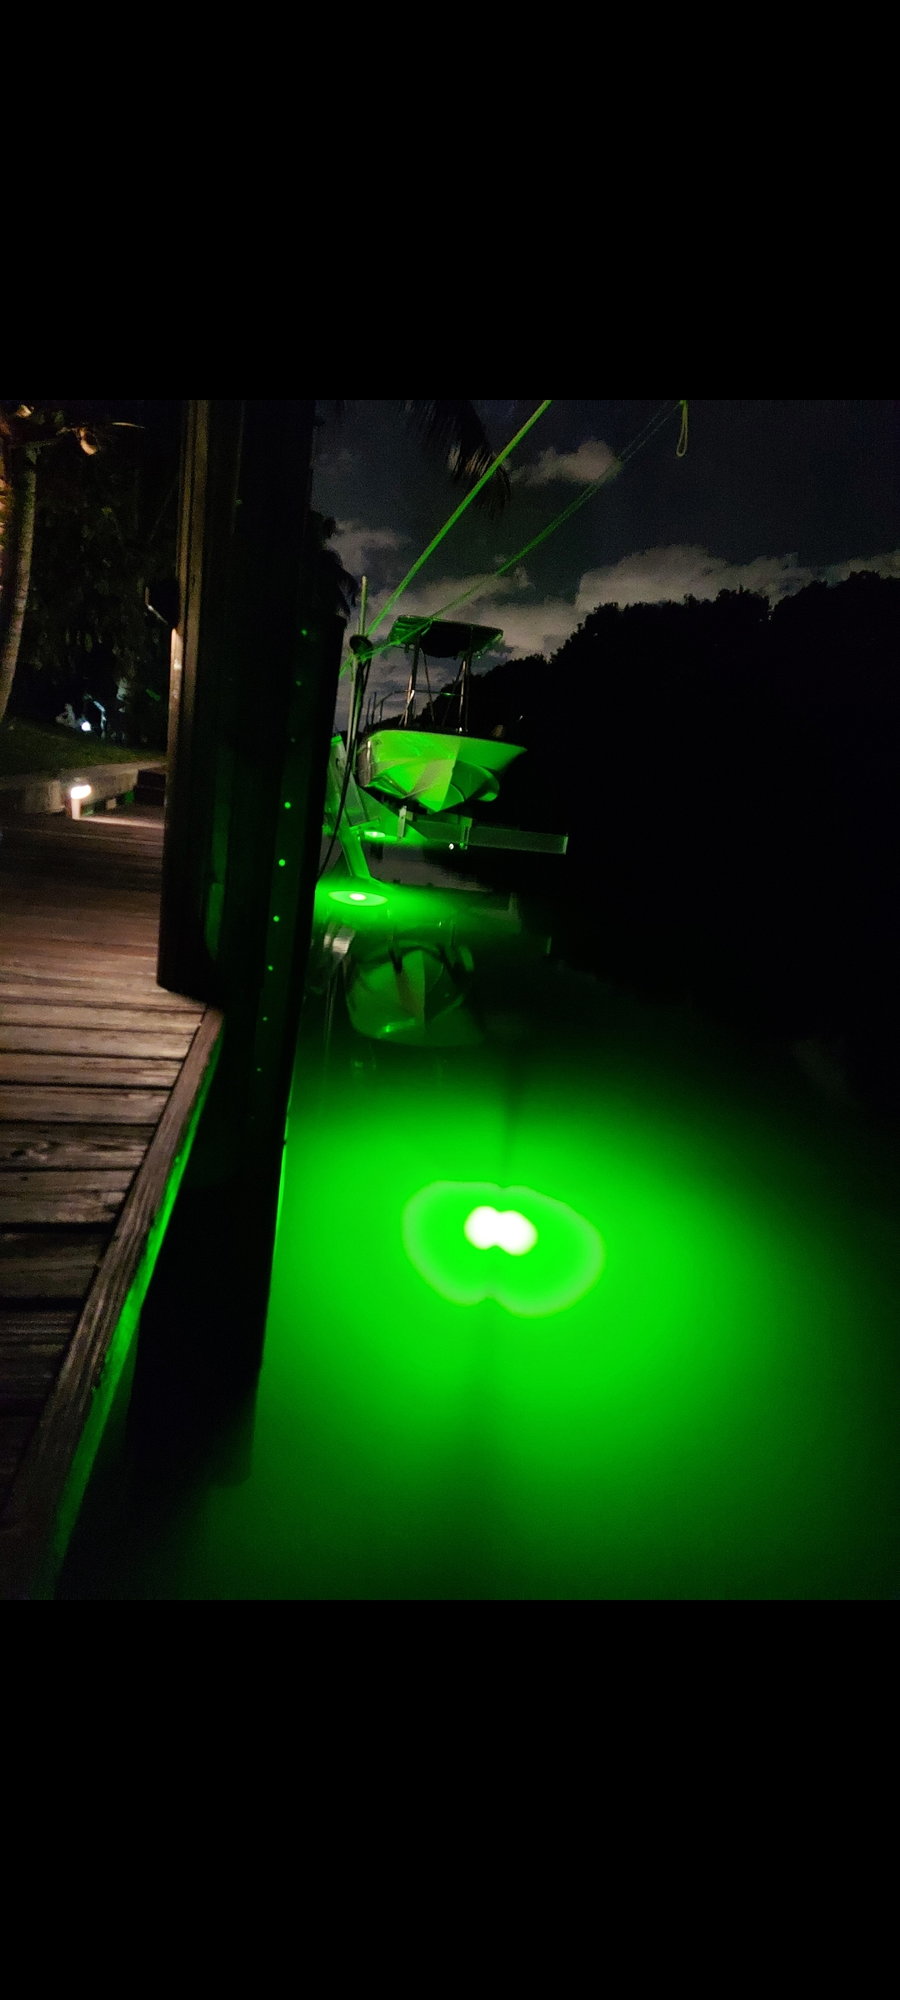 Multi-color Dock Fishing Light With Remote, Green Blob Outdoors